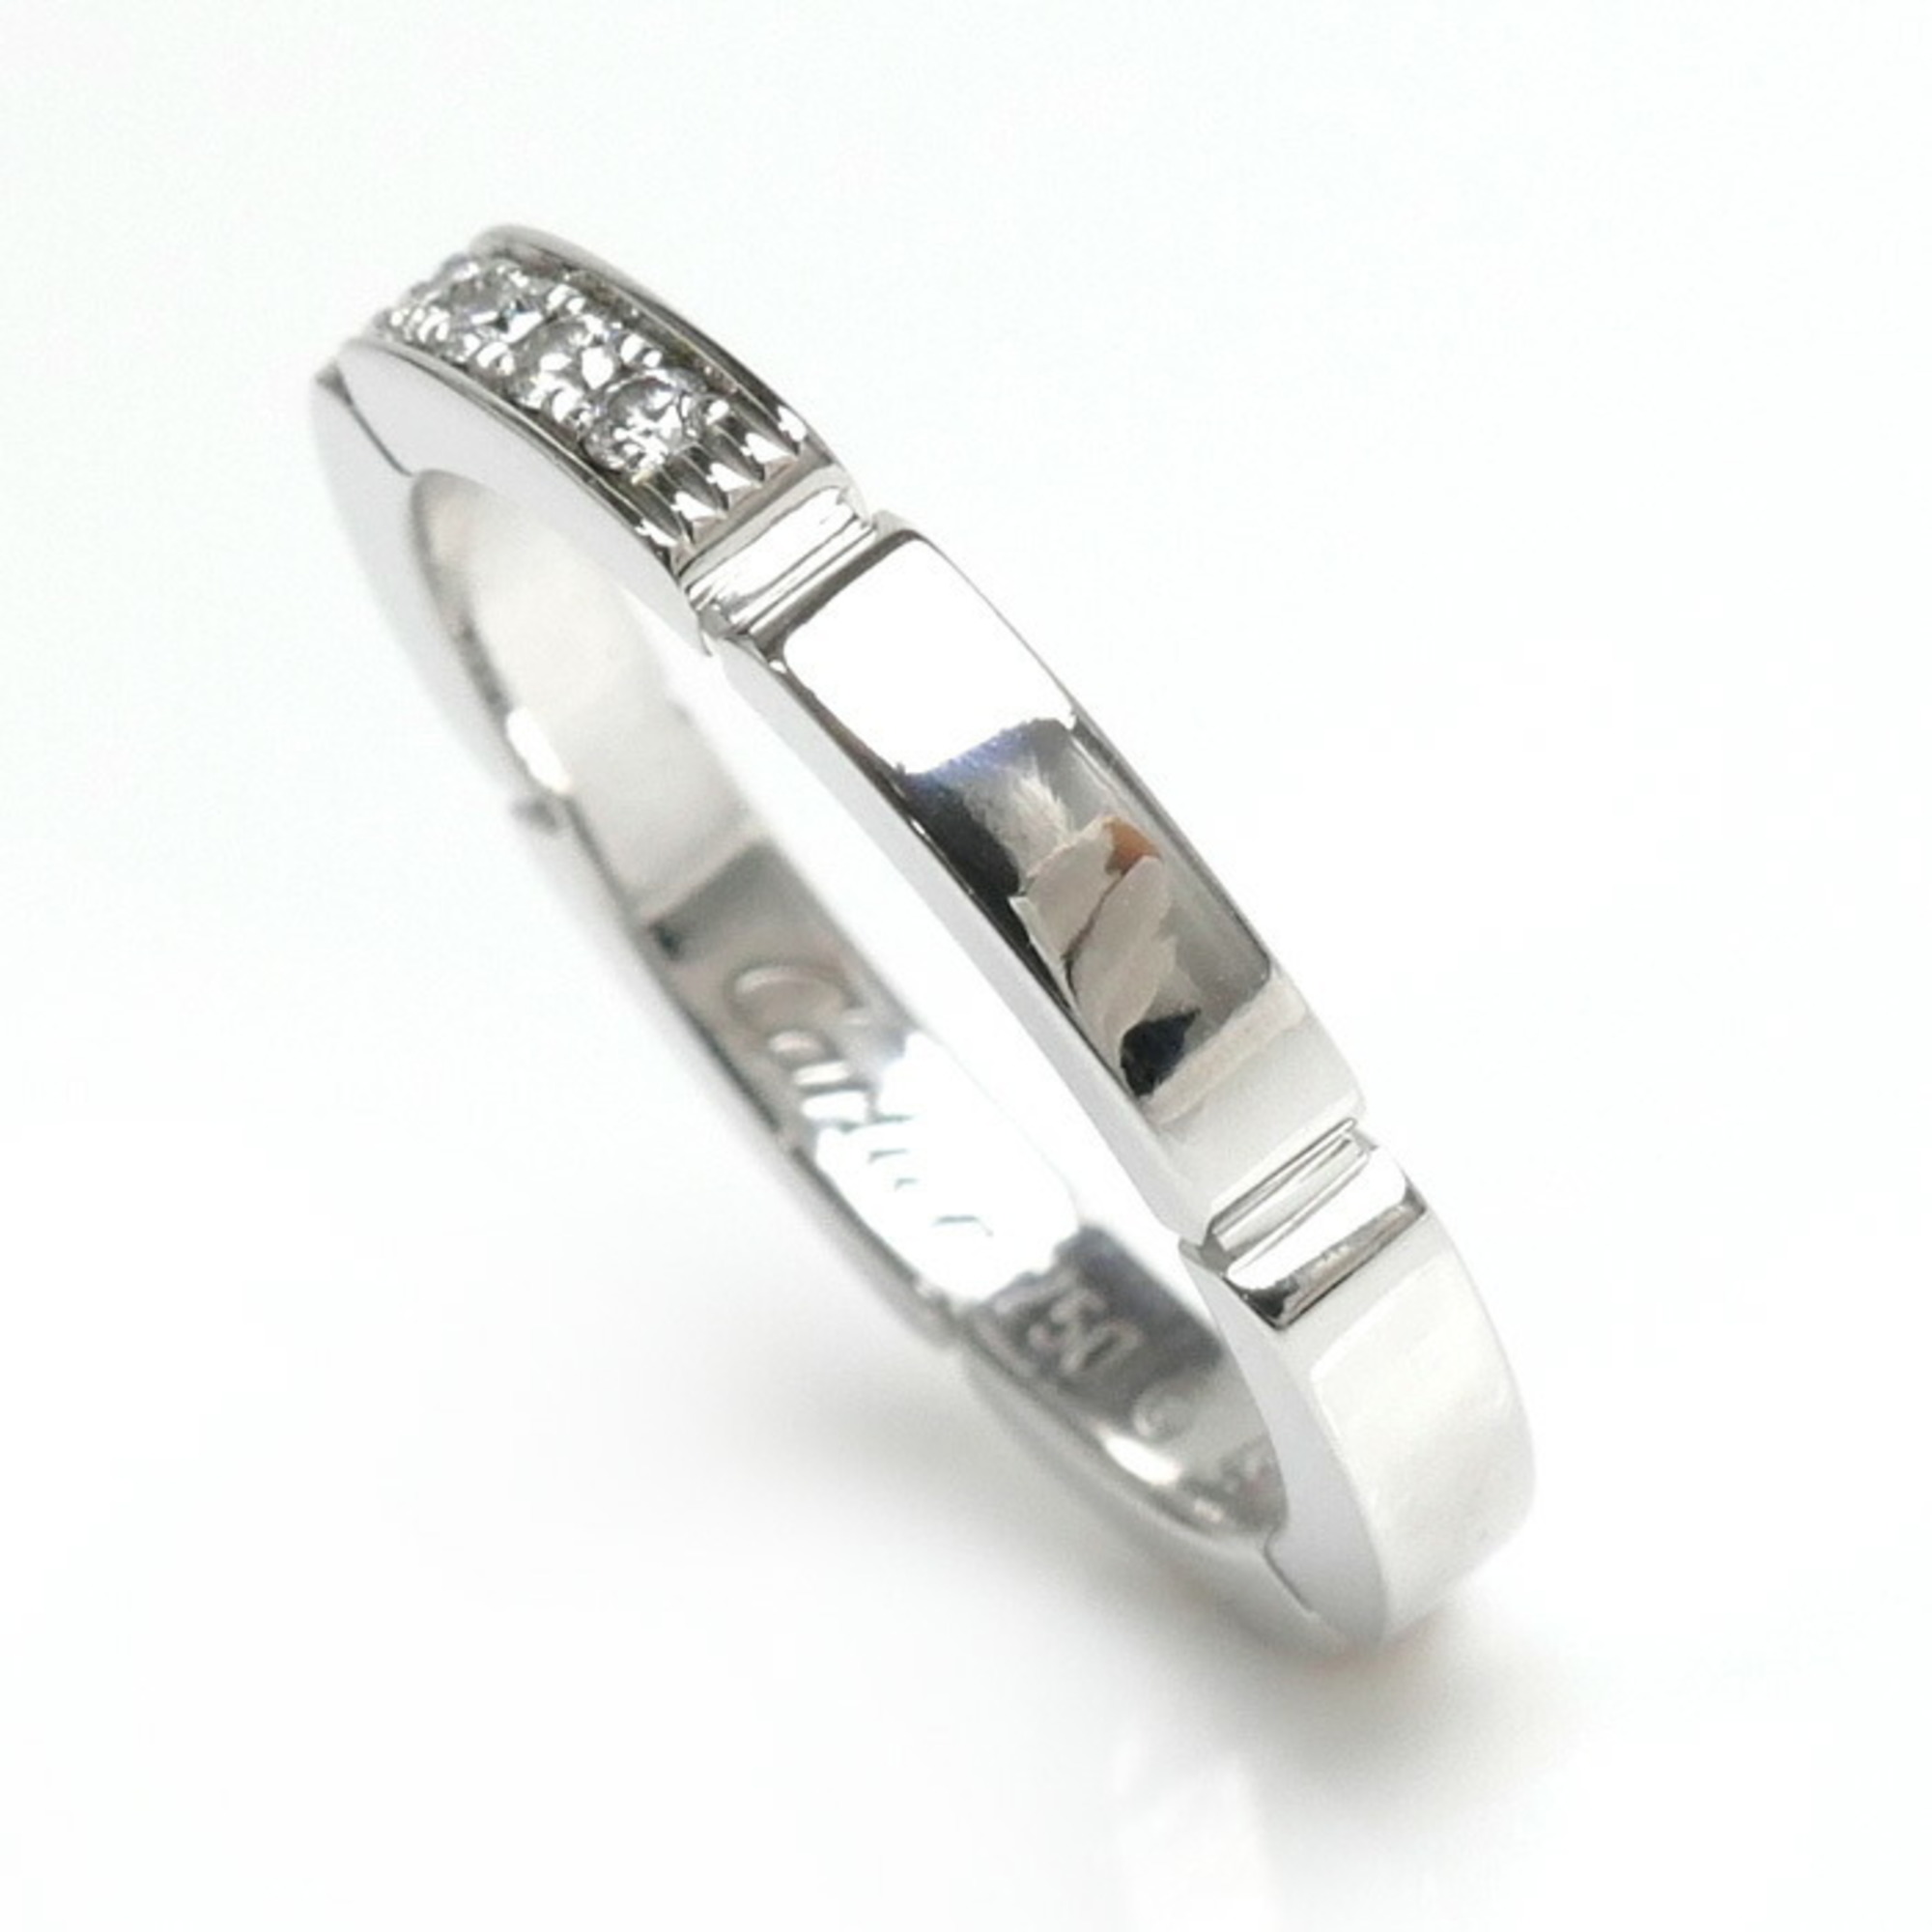 CARTIER Cartier K18WG White Gold Maillon Panthere 4PD Ring B4080449 Diamond Size 9 49 3.8g Women's